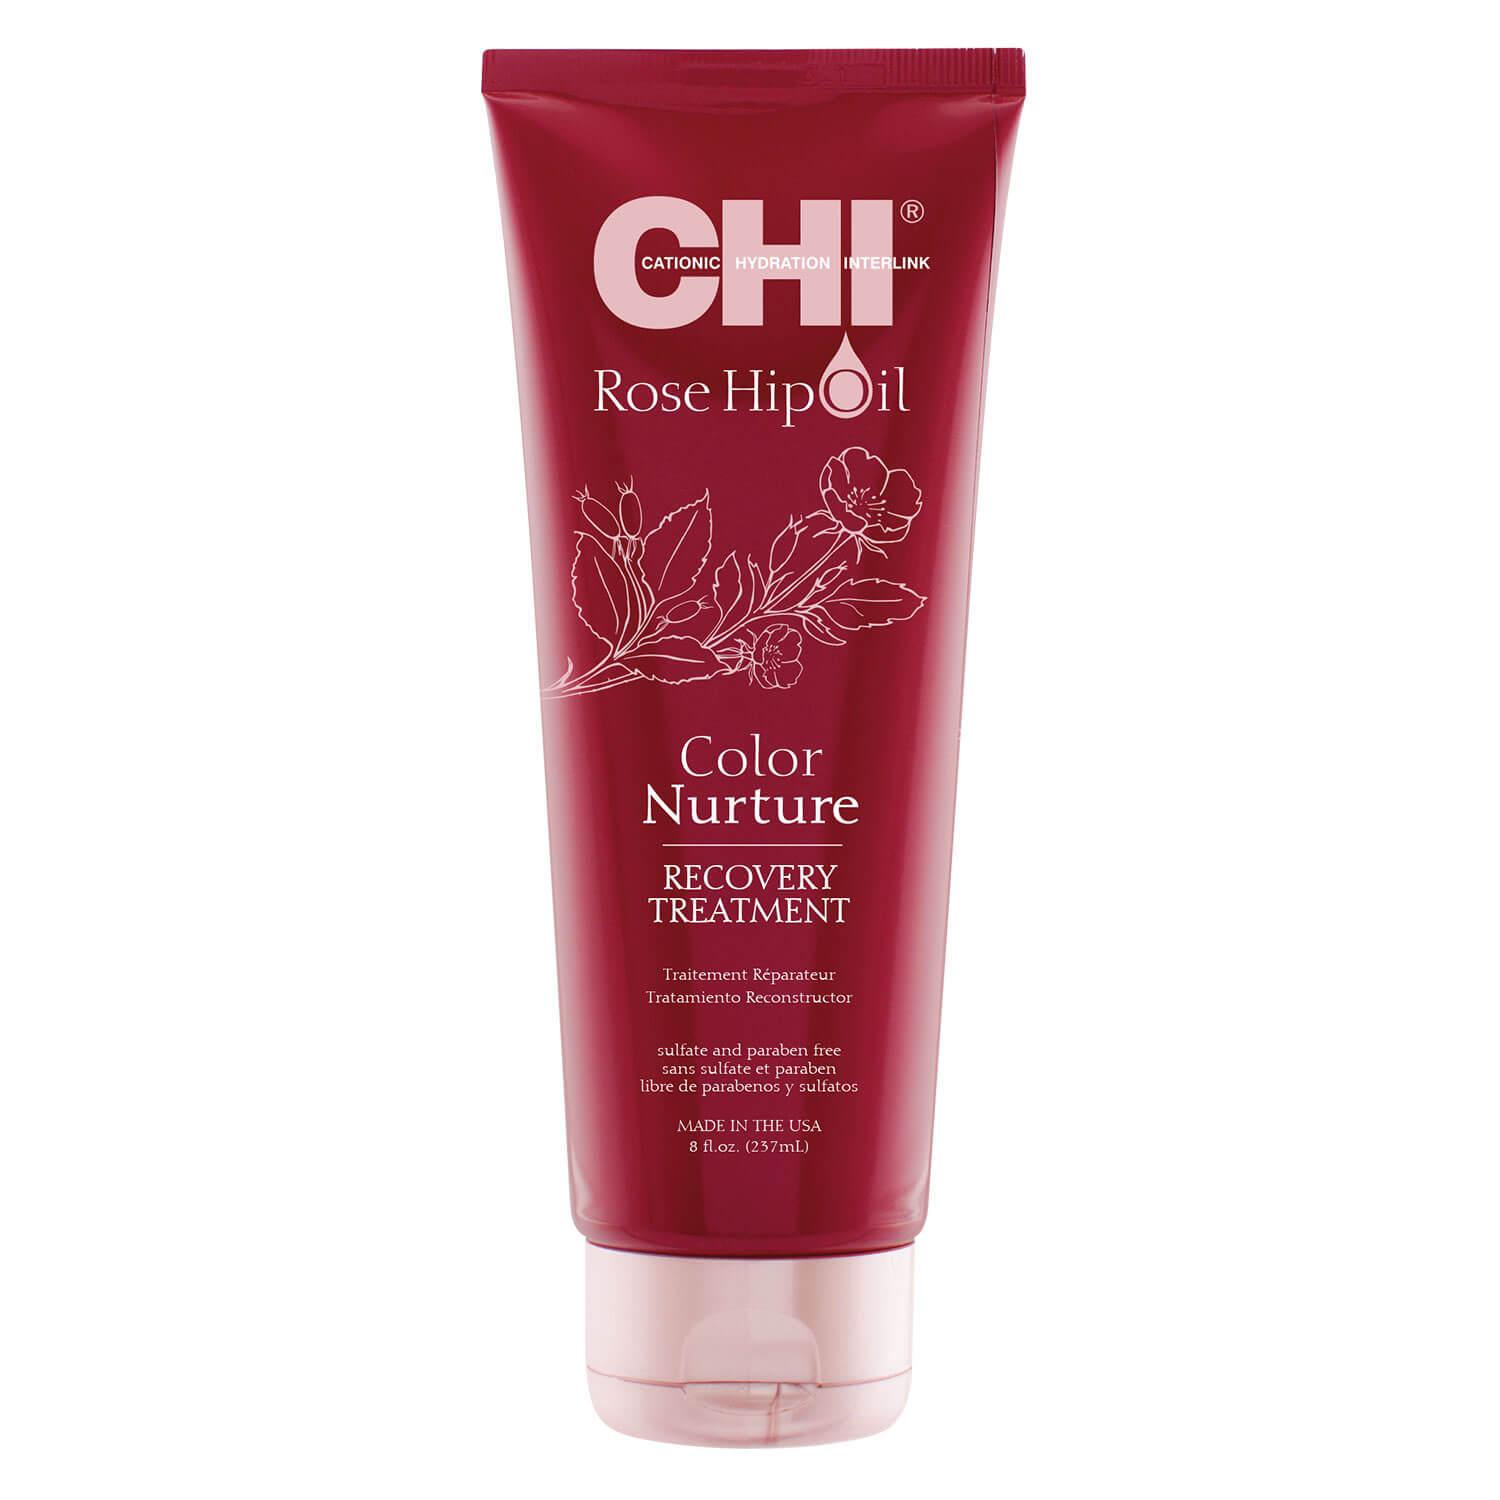 CHI Rose Hip Oil - Recovery Treatment